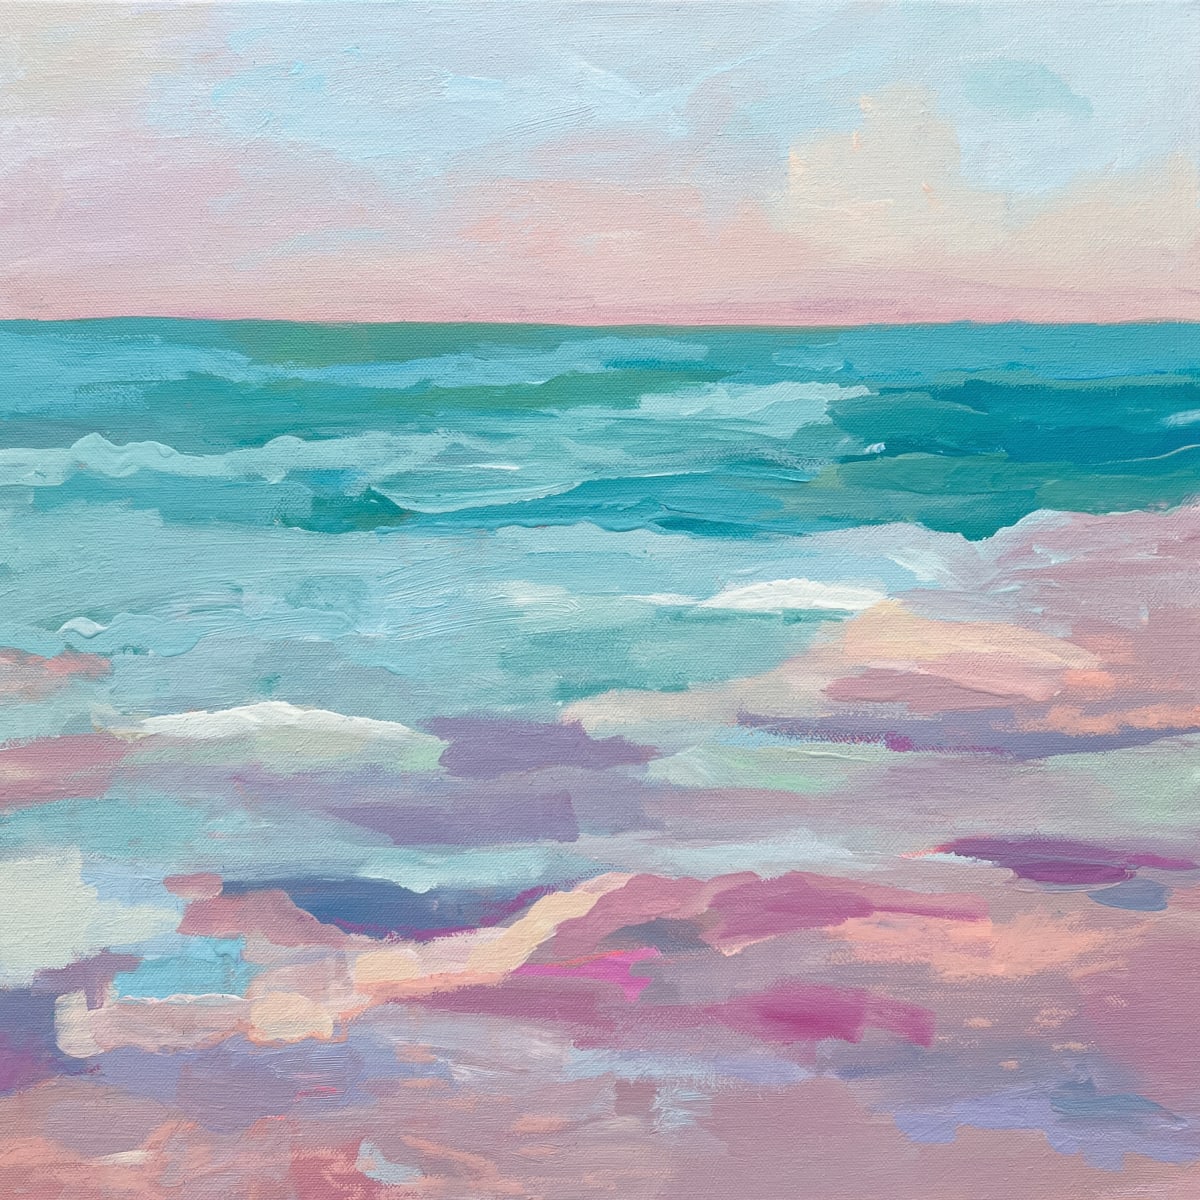 Winter Sun by Honor Bowden  Image: ‘Shimmering in winter’s embrace ❄️✨ fresh off the easel. The cool shades of blue contrasting with that last bit of pinky sunset is just magic here, we never stray far from the beach - even at this time of year!’